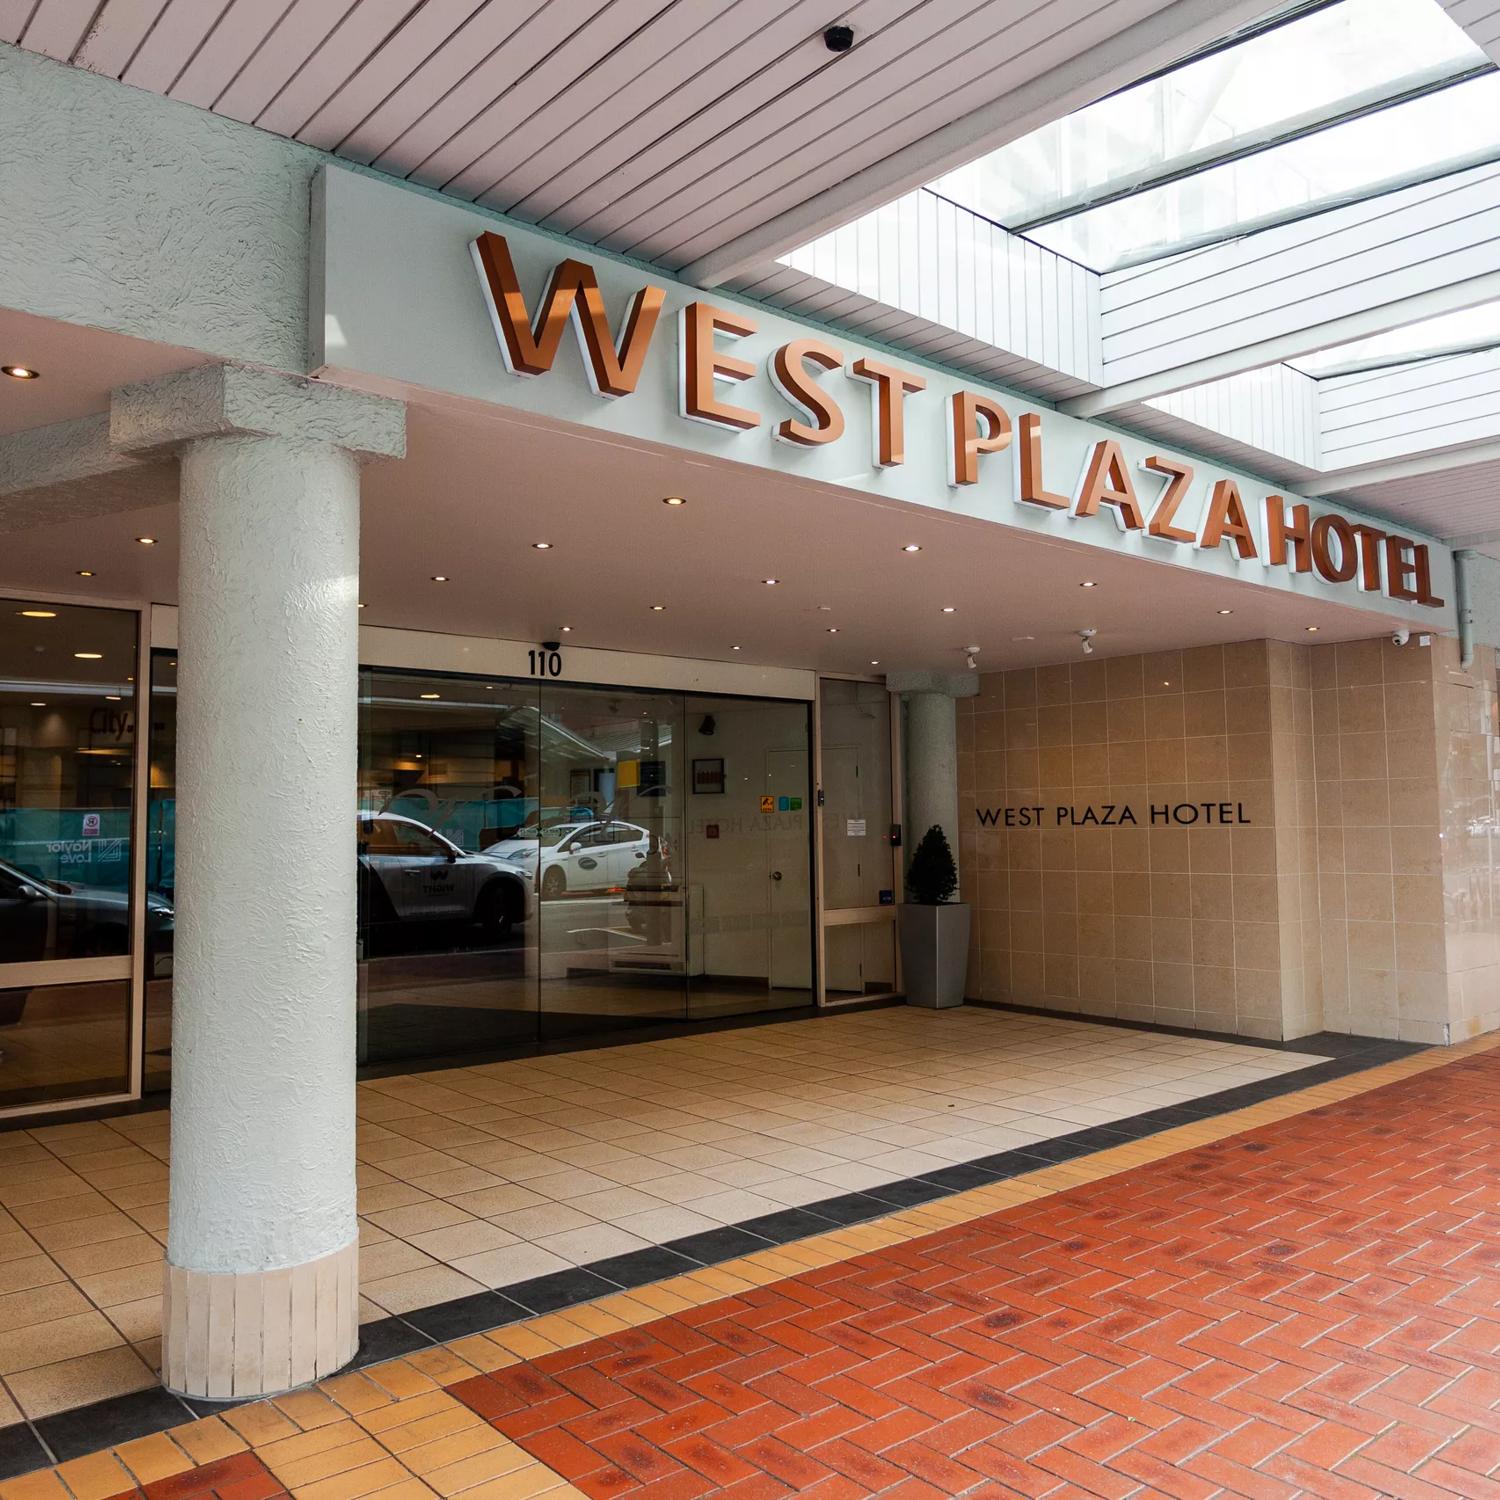 The exterior of West Plaza Hotel, with a tiled floor and large sliding doors.